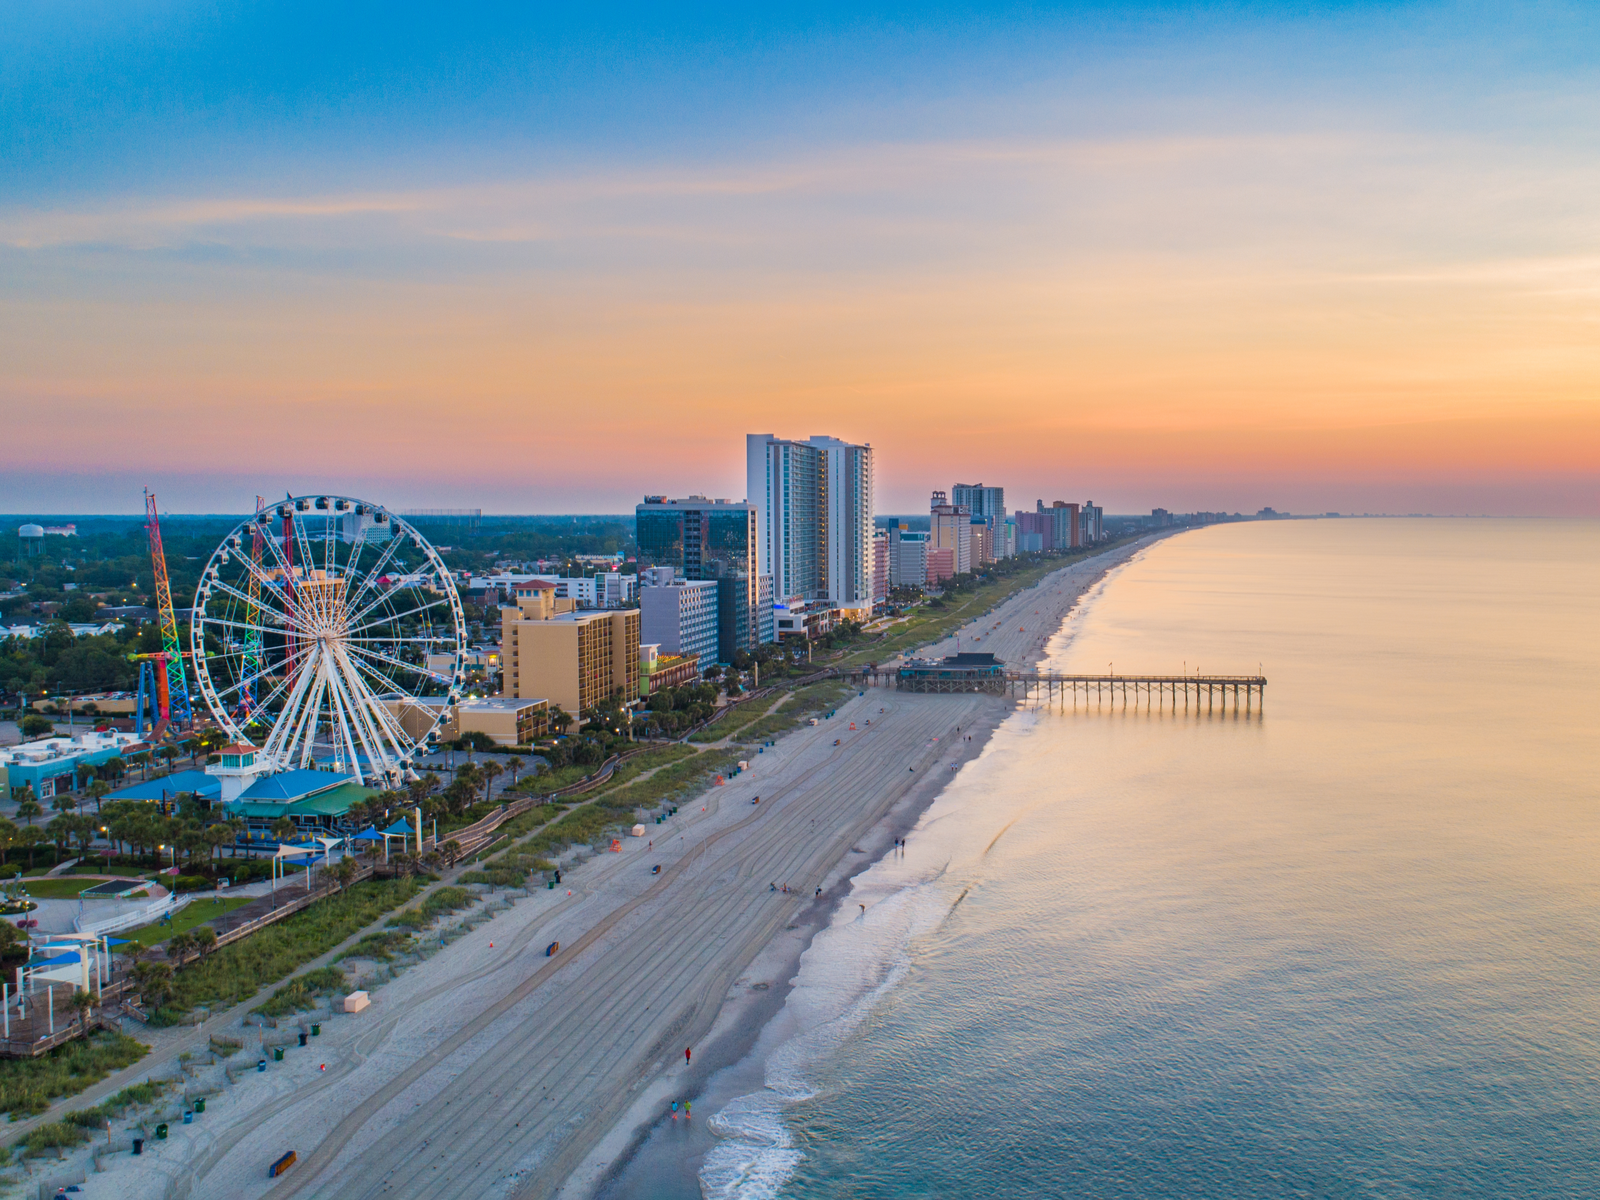 Sunset over the Myrtle Beach in South Carolina, a piece on the best beaches on the East Coast, seen with its dock, gigantic ferris wheel, and row of hotels at its coast